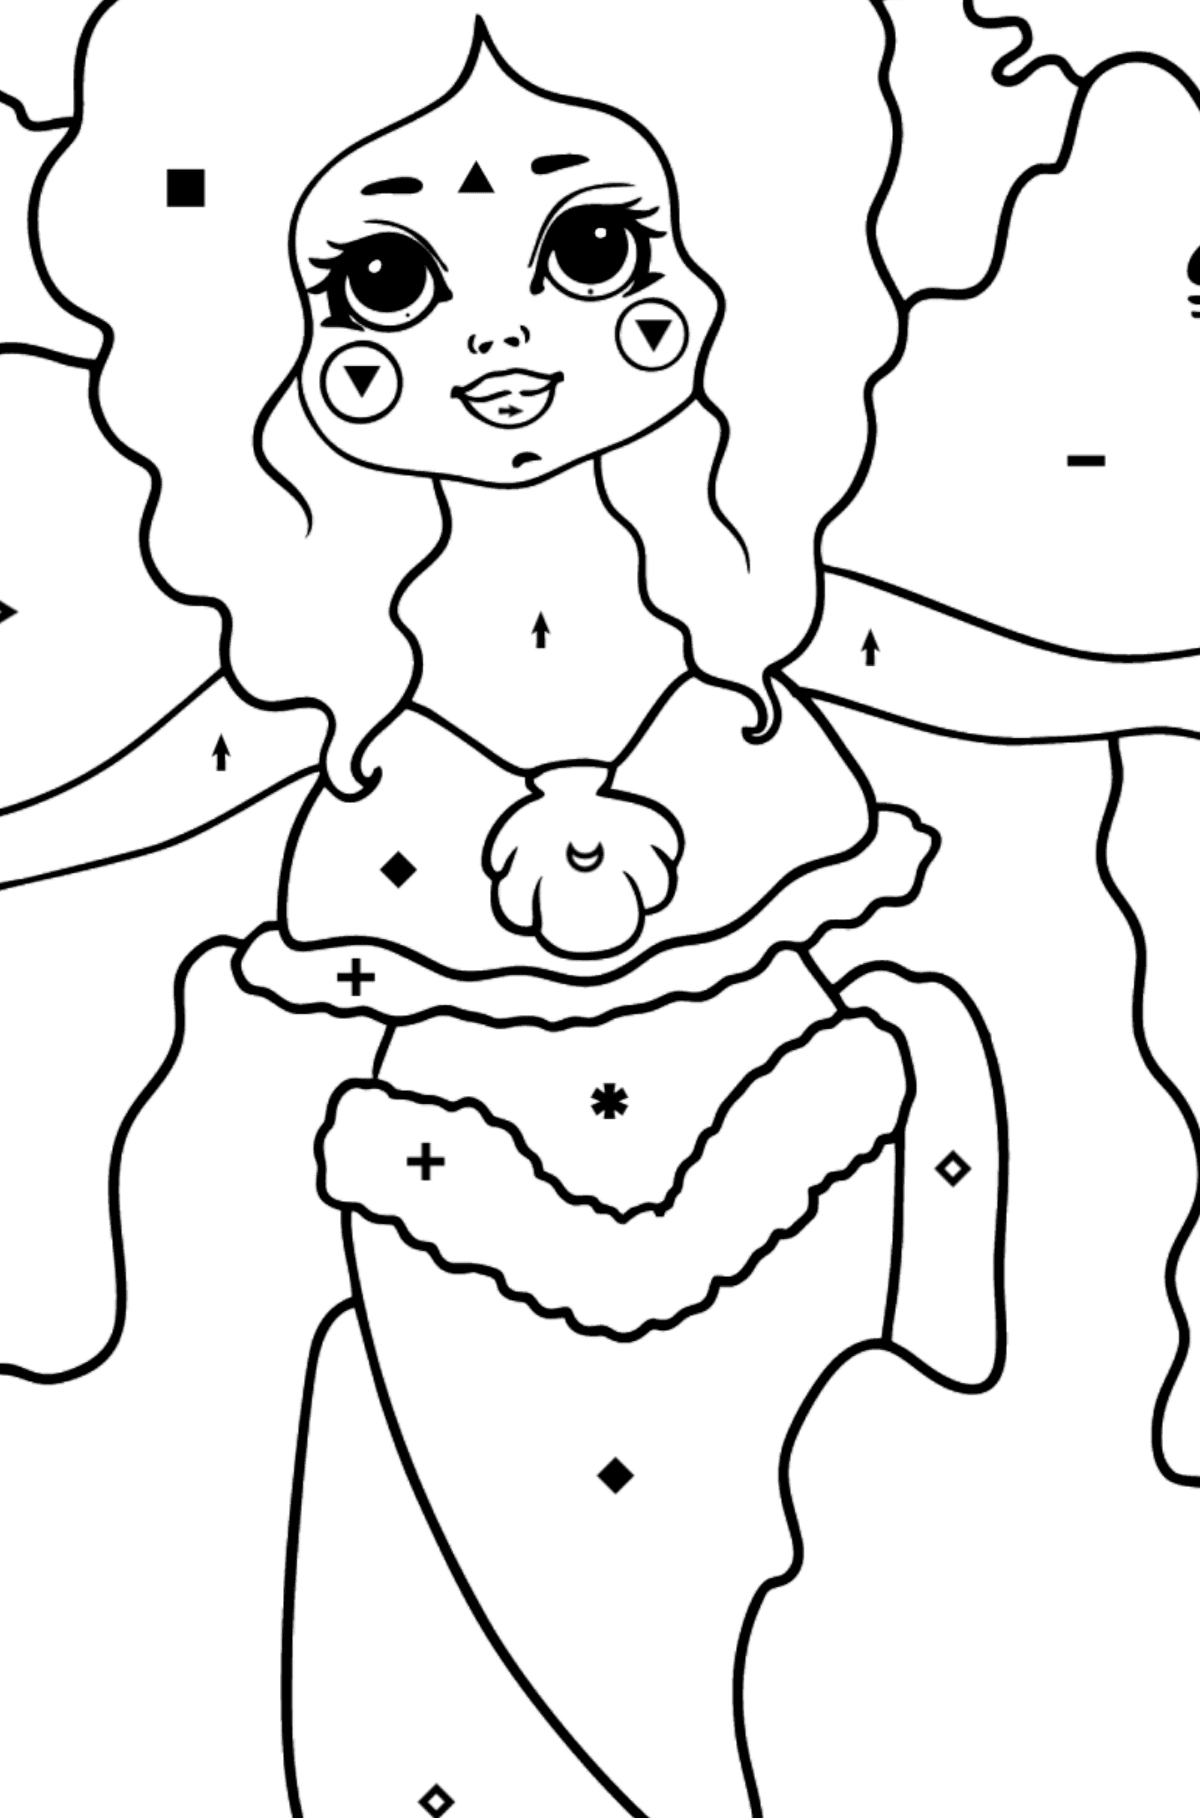 Mermaid and Colorful Corals coloring page - Coloring by Symbols for Kids